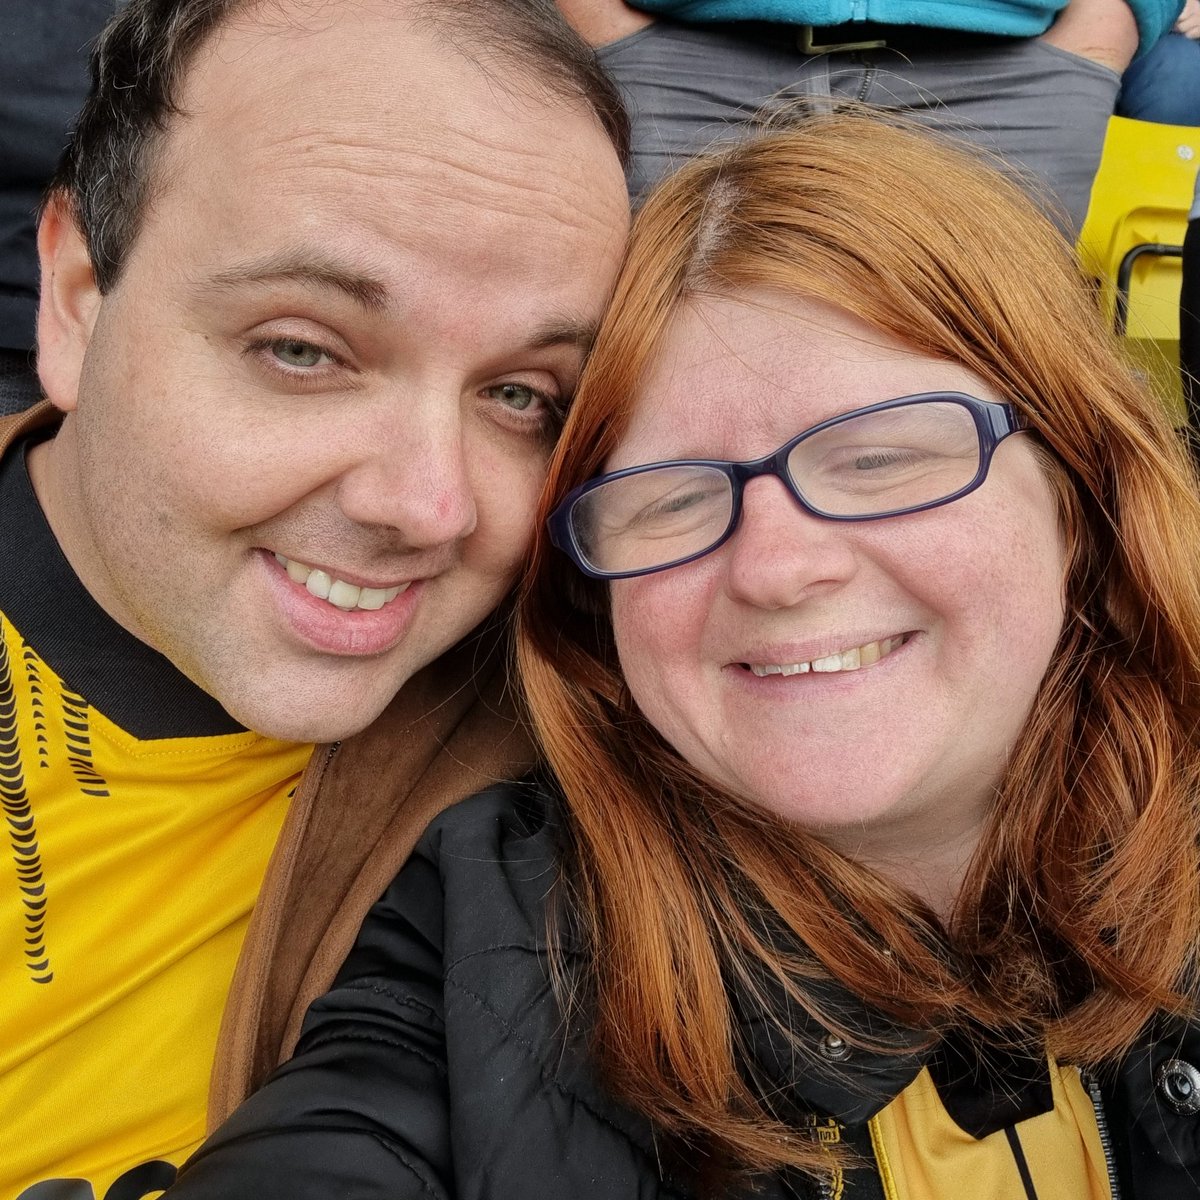 A wee afternoon at the football and Livi keeping the hope alive (for a wee bit longer). #lovethelifeyoulivelivethelifeyoulove #footballSaturday